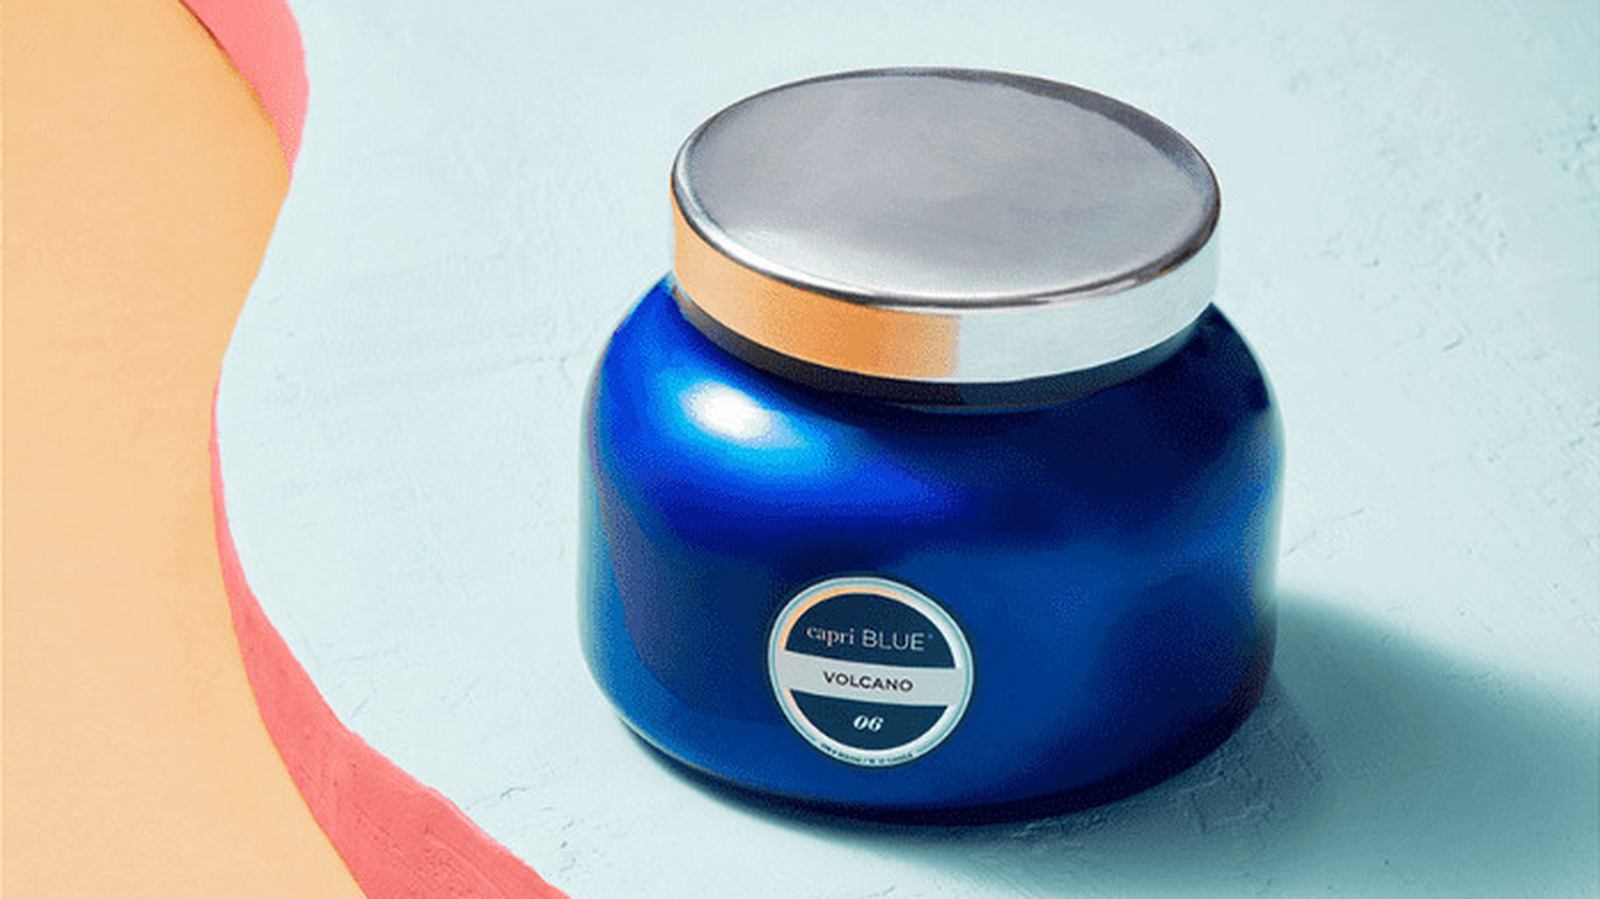 Marion's - Our favorite Capri Blue candle scent - Volcano Now